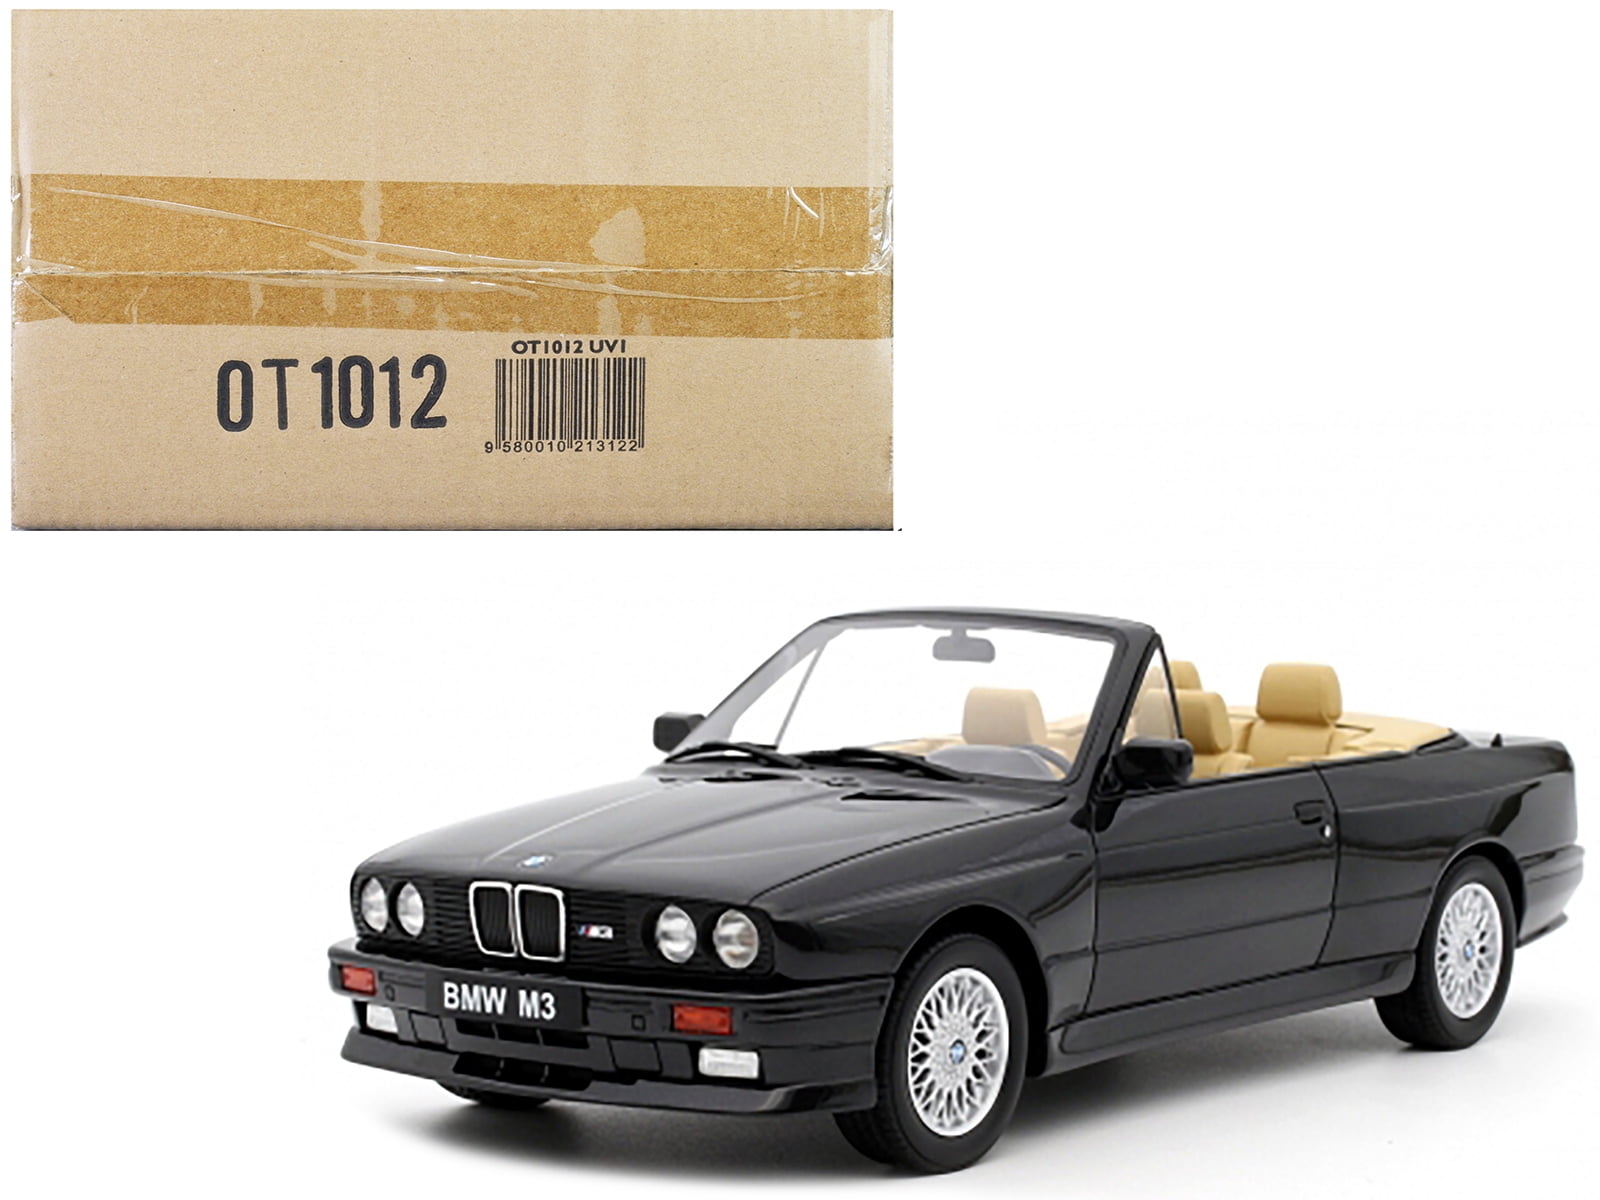 Diecast 1989 BMW E30 M3 Convertible Diamond Black Metallic Limited Edition  to 3000 pieces Worldwide 1/18 Model Car by Otto Mobile